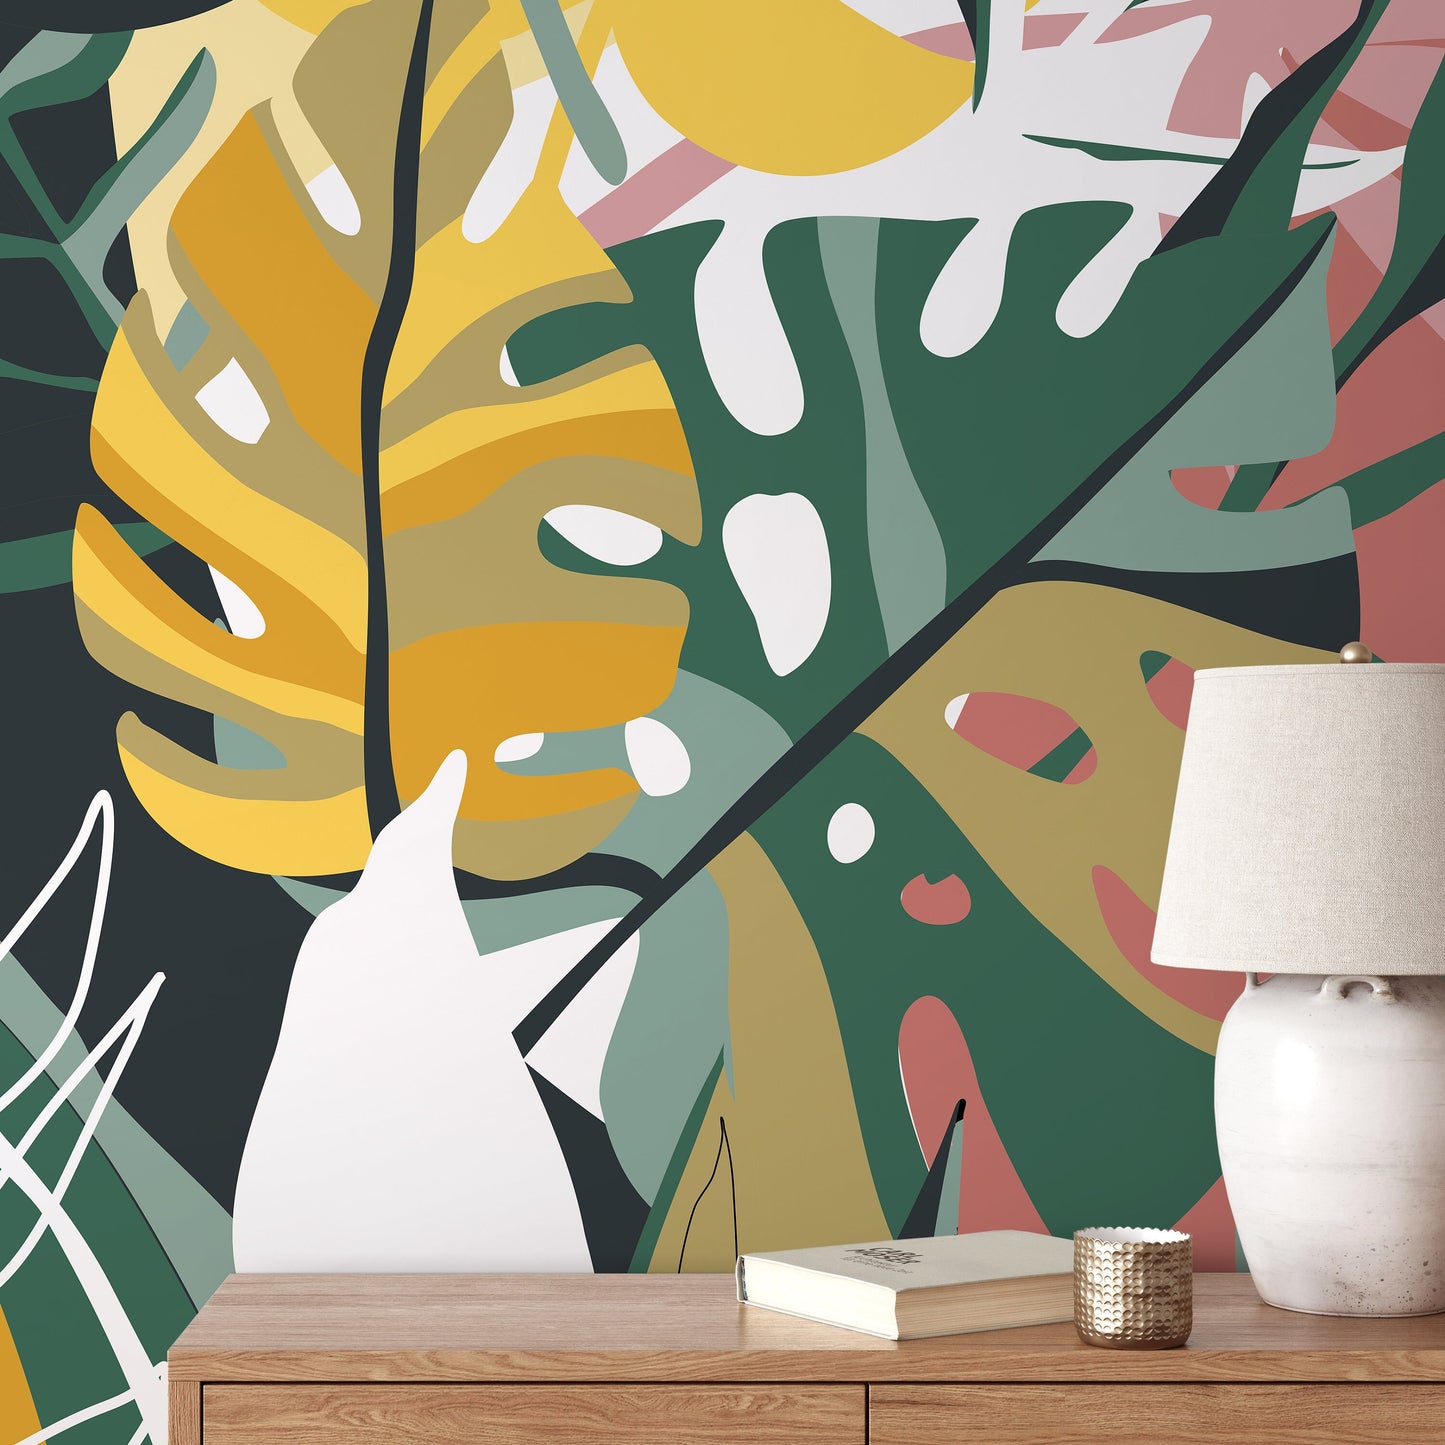 Flat Colorful Leaves Wallpaper - Removable Wallpaper Peel and Stick Wallpaper Wall Paper Wall Mural - C135